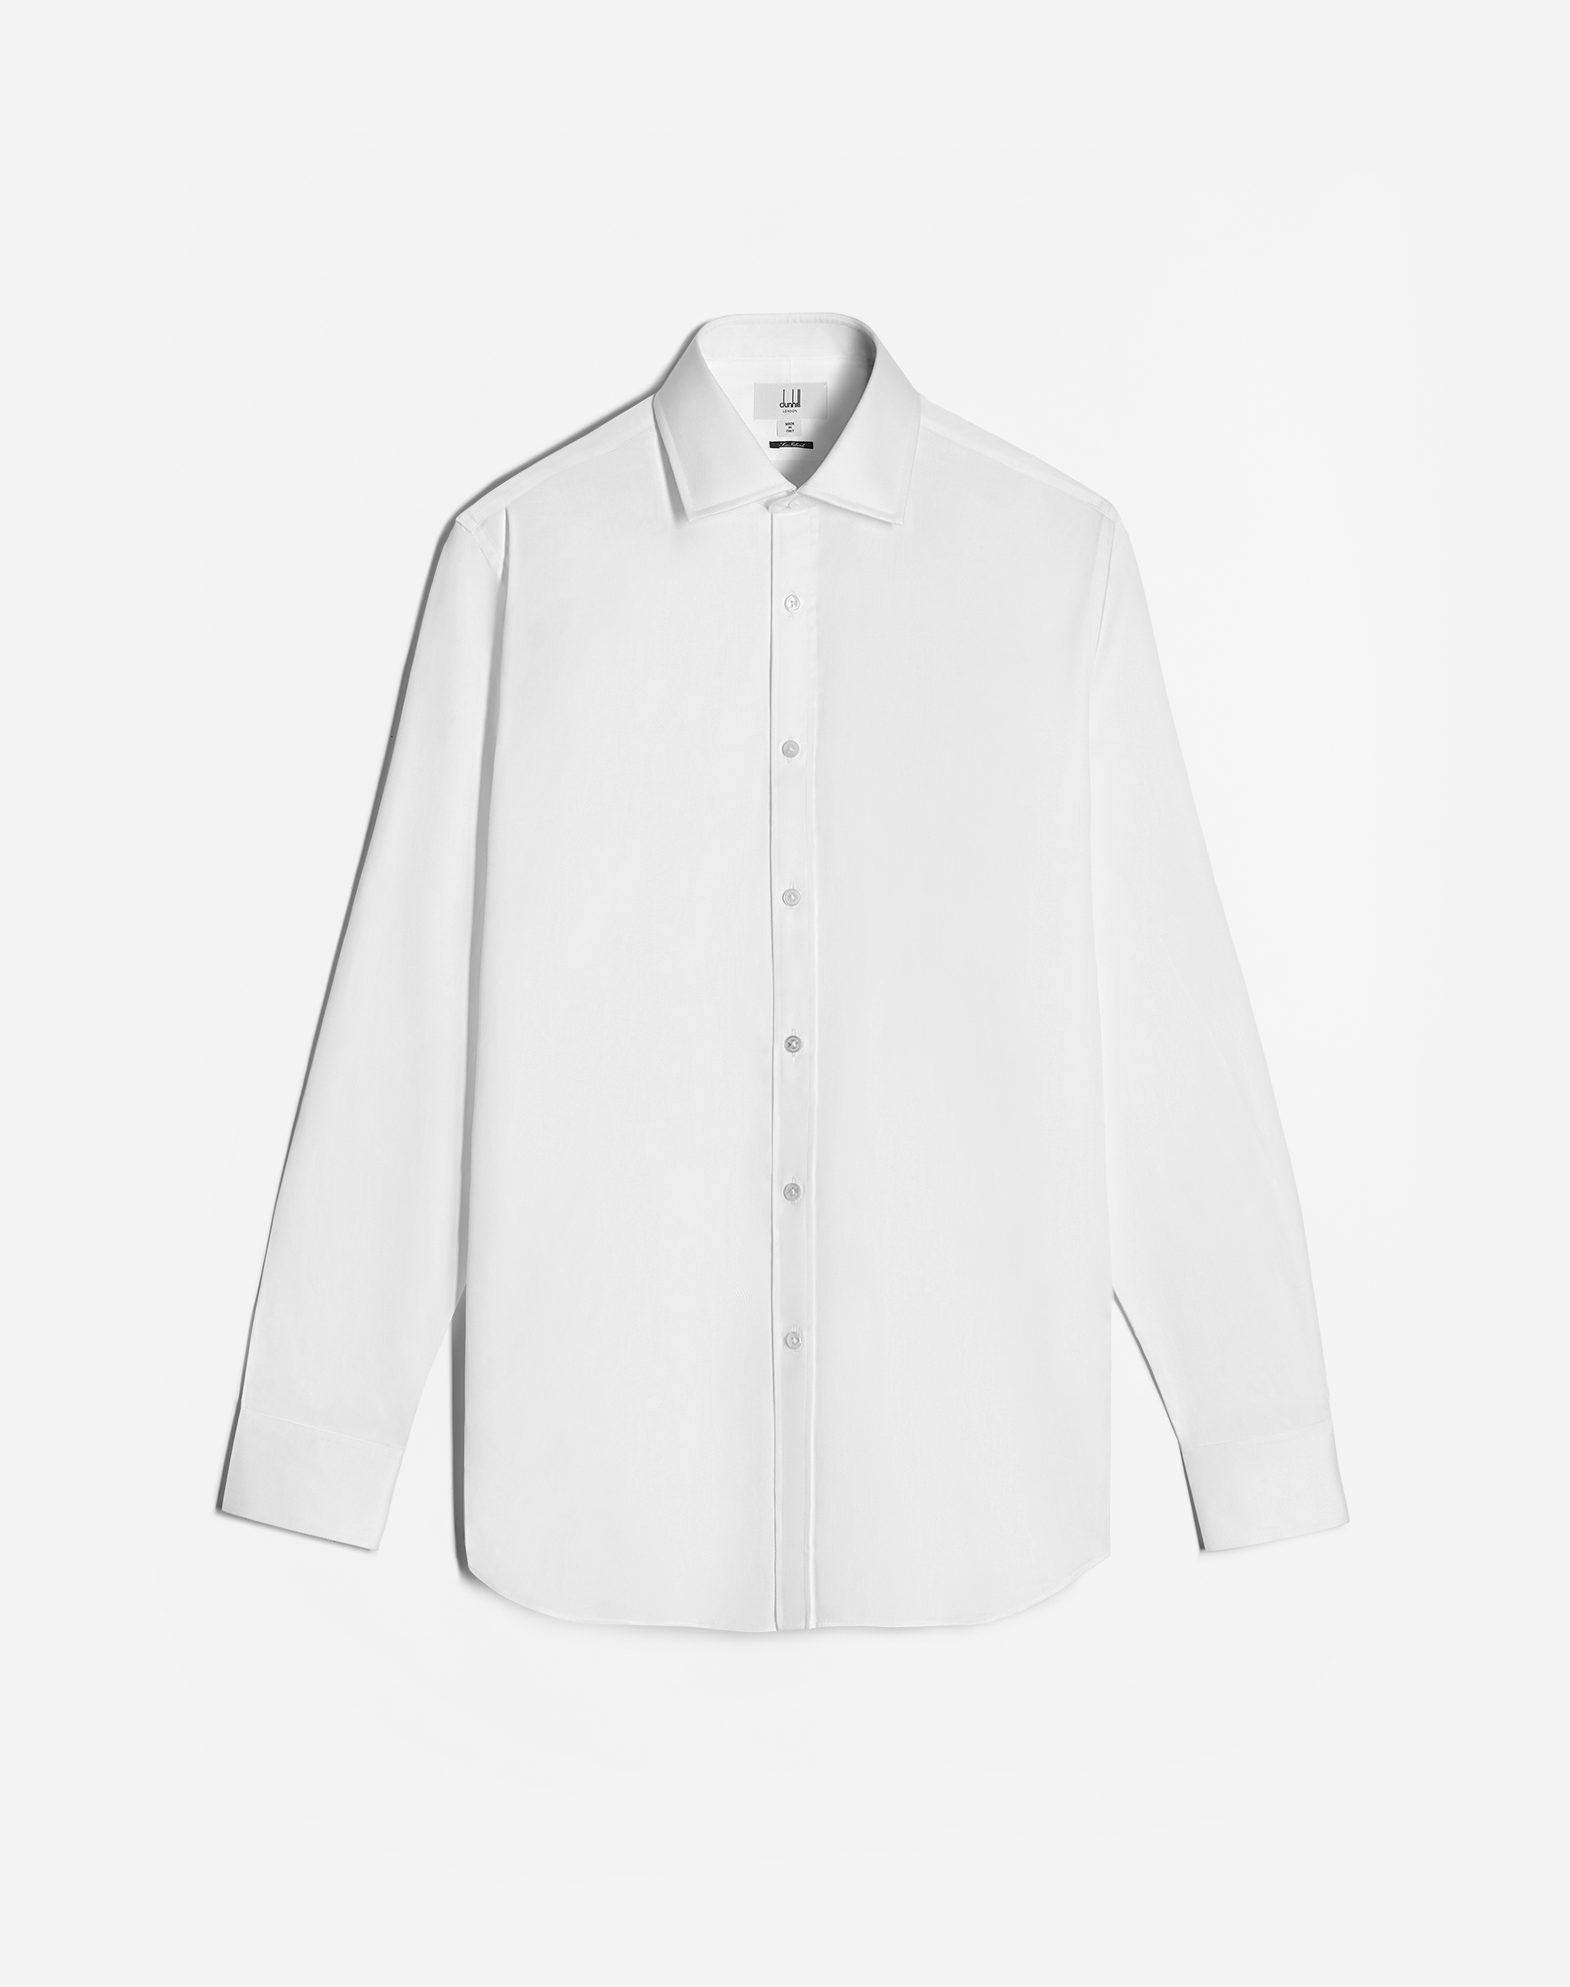 Dunhill Luxury Men's Formal Shirts